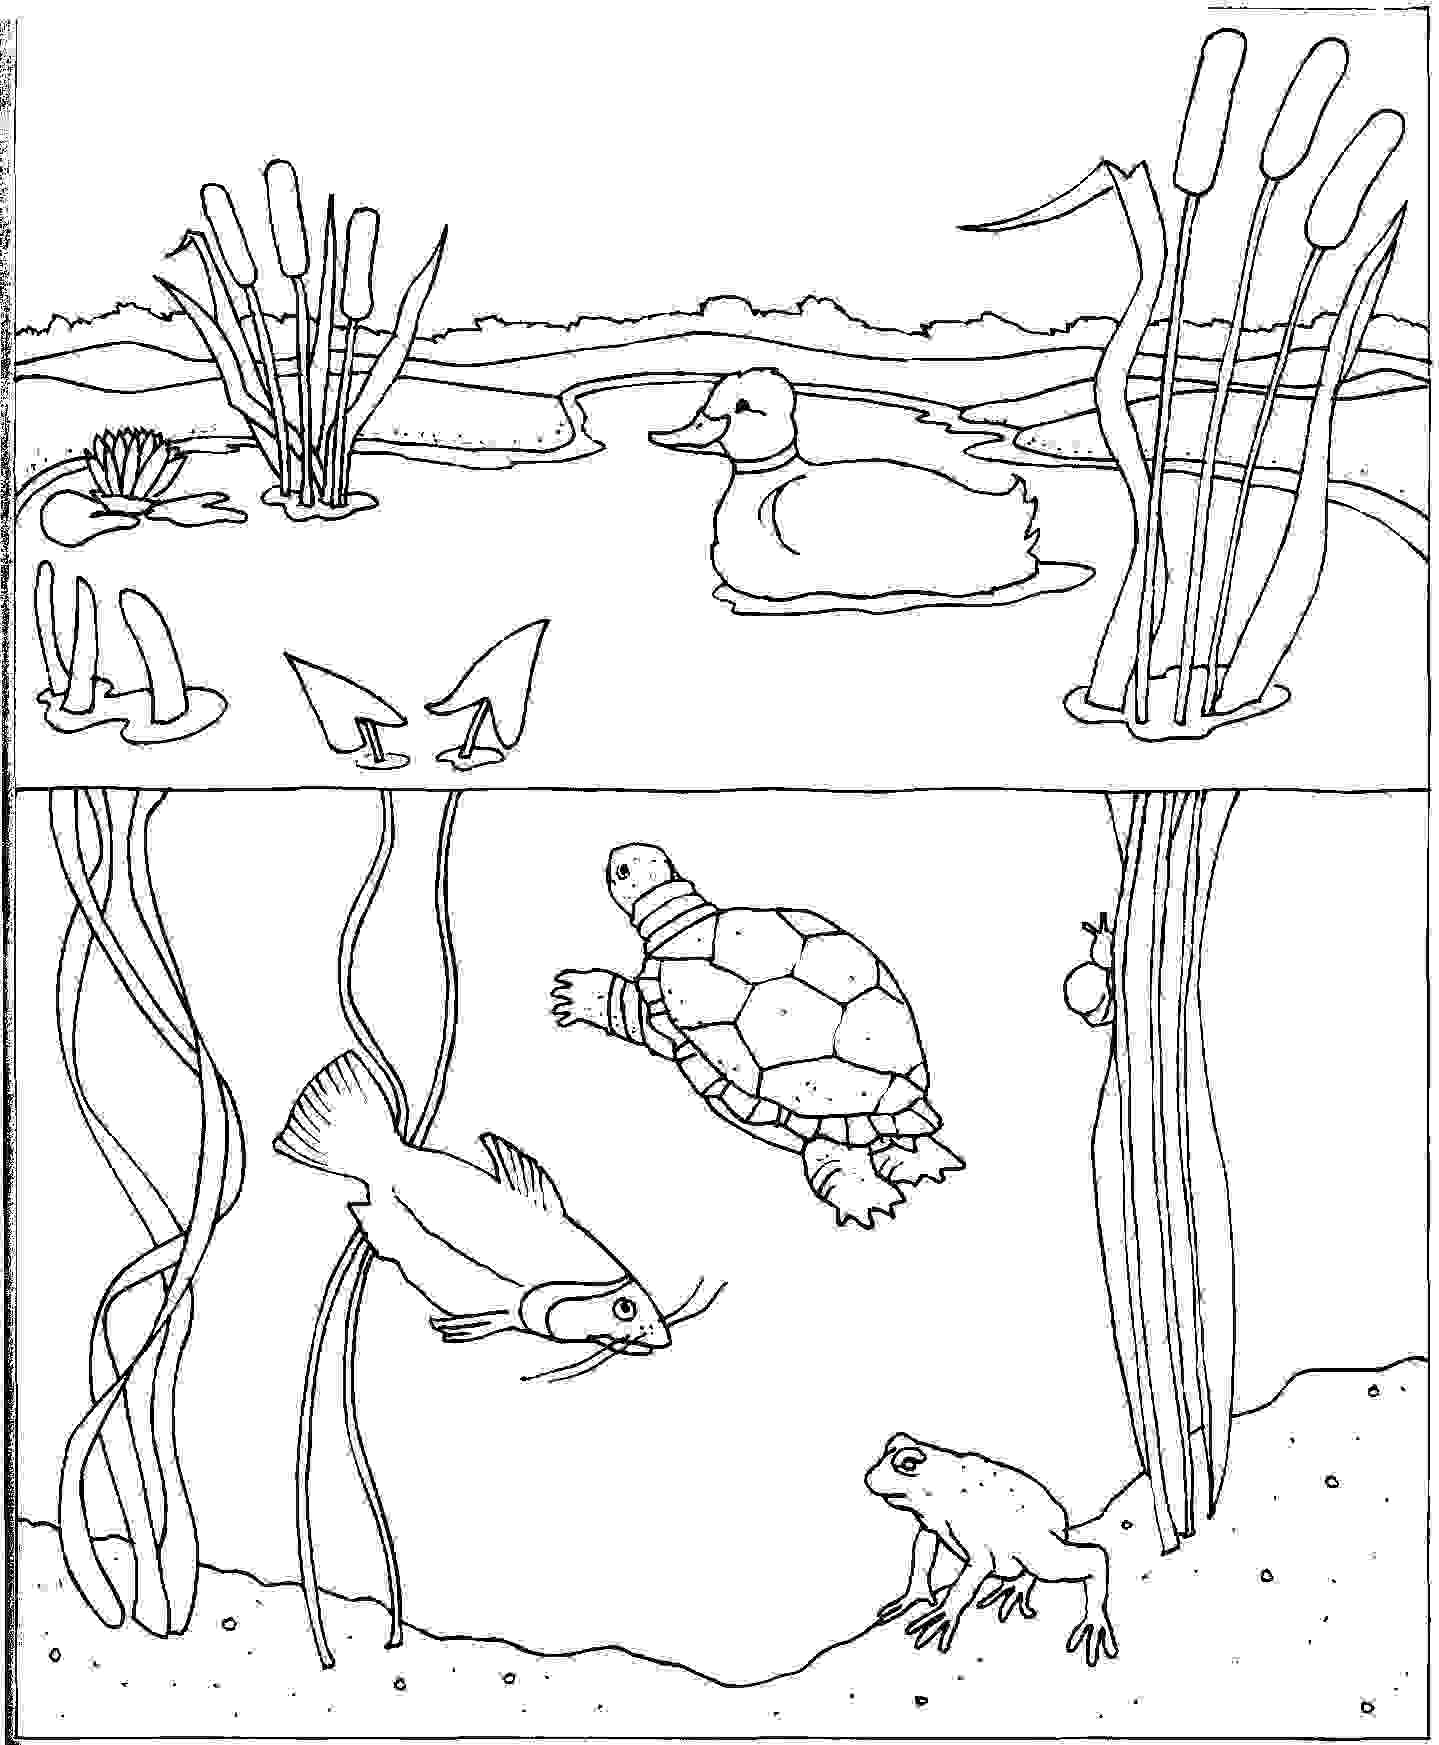 Water Cycle Coloring Pages For Preschoolers - Coloring Page